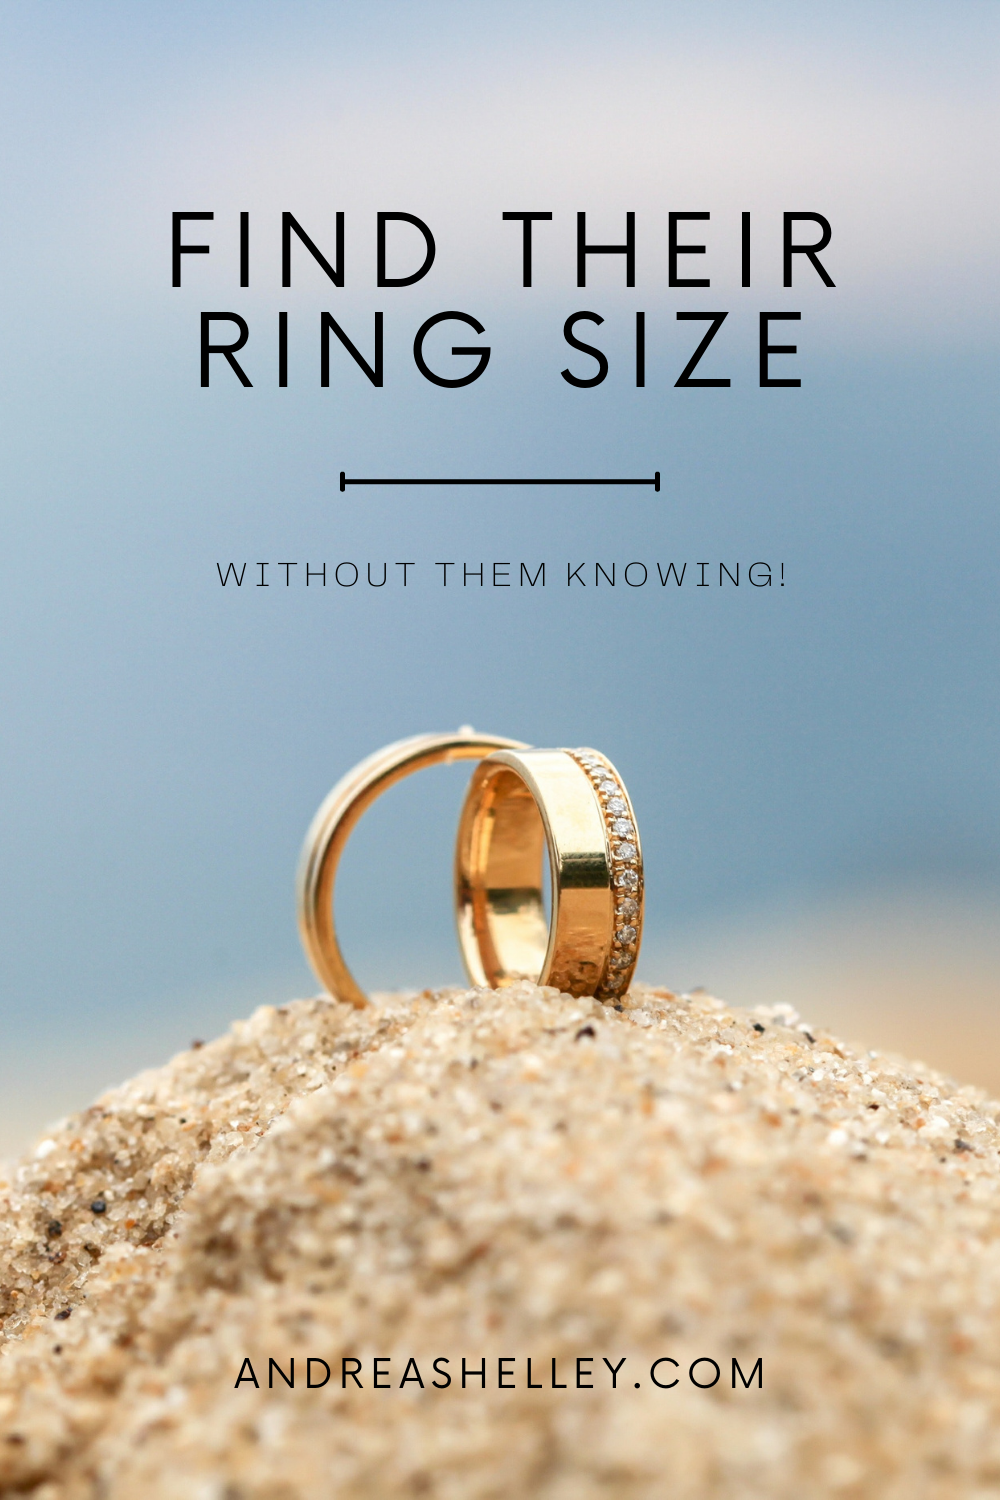 How to find their ring size without them knowing.